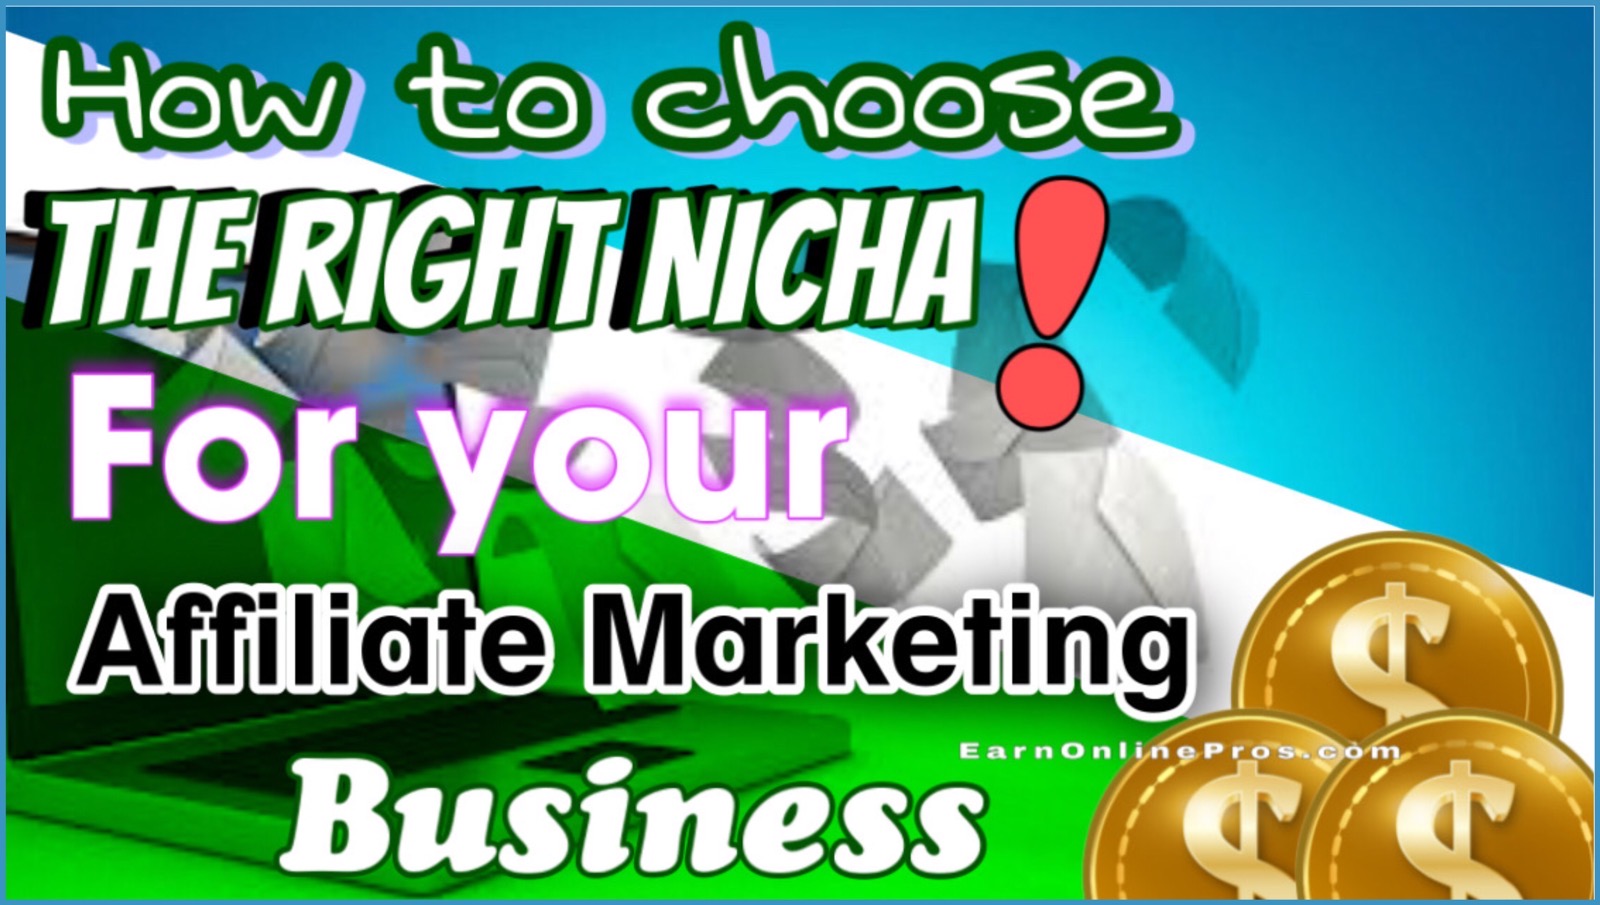 How to Choose the Right Niche for Your Affiliate Marketing Business